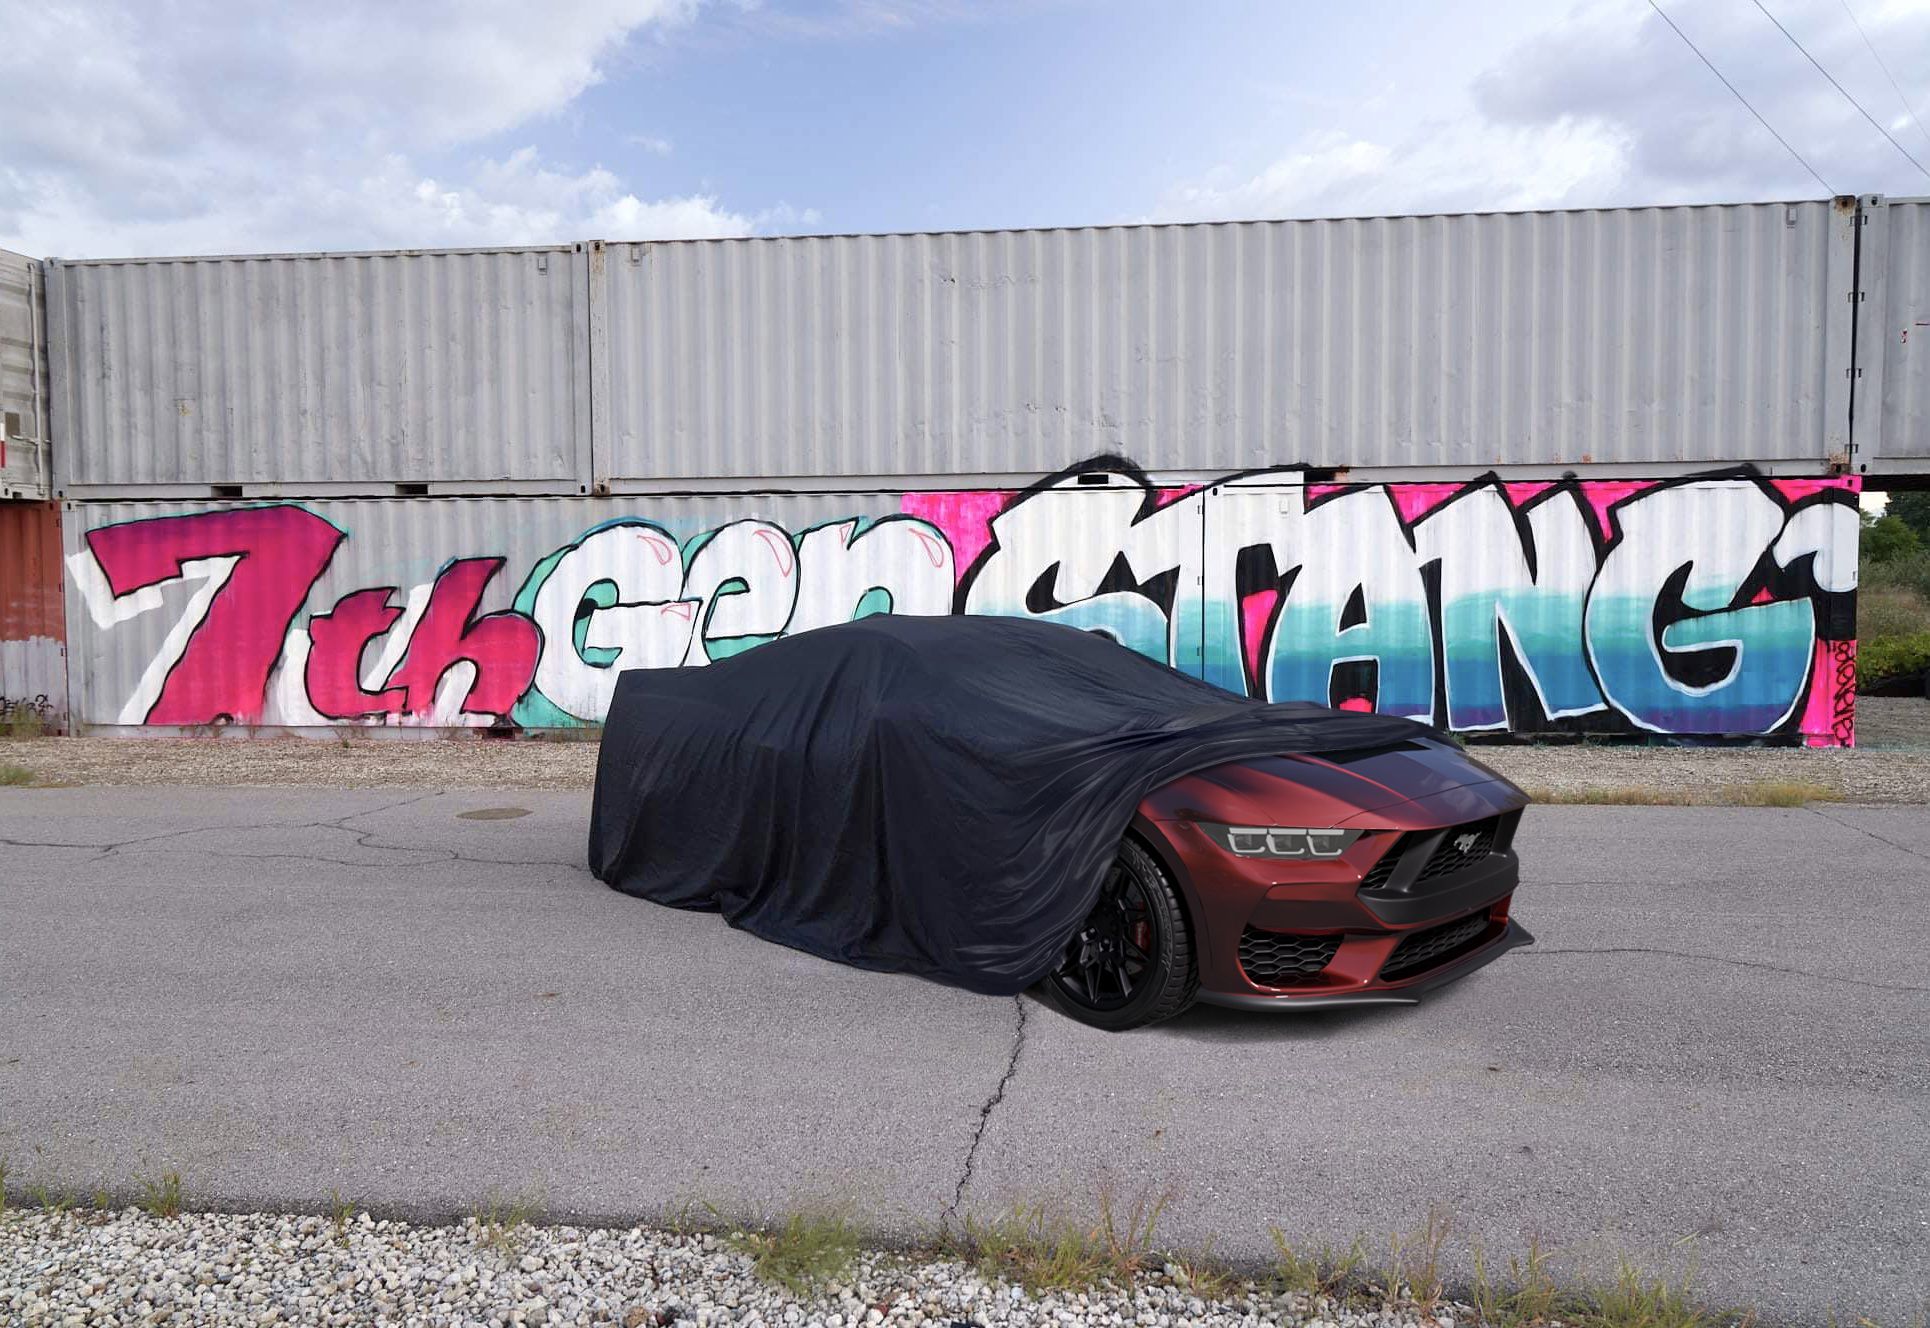 S650 Mustang New 7th gen Mustang teaser image with ducktail spoiler under cover! 623A2280-E74C-4A29-ACEC-C9CBD59936BF